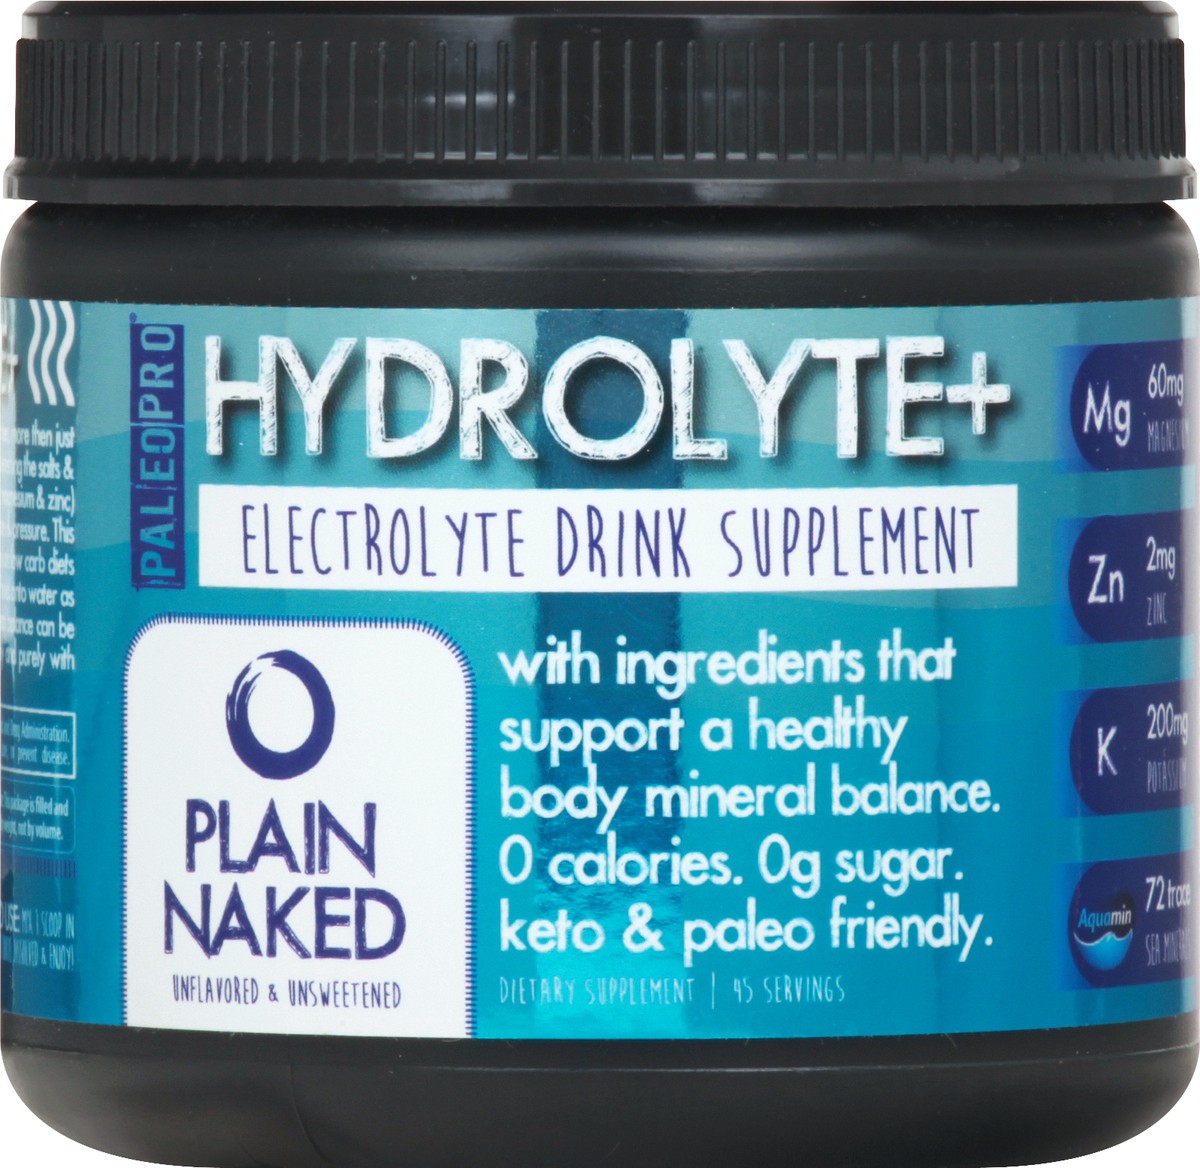 slide 8 of 13, Hydrolyte + Electrolyte Unflavored & Unsweetened Plain Naked Drink Supplement 1 ea, 6.3 oz